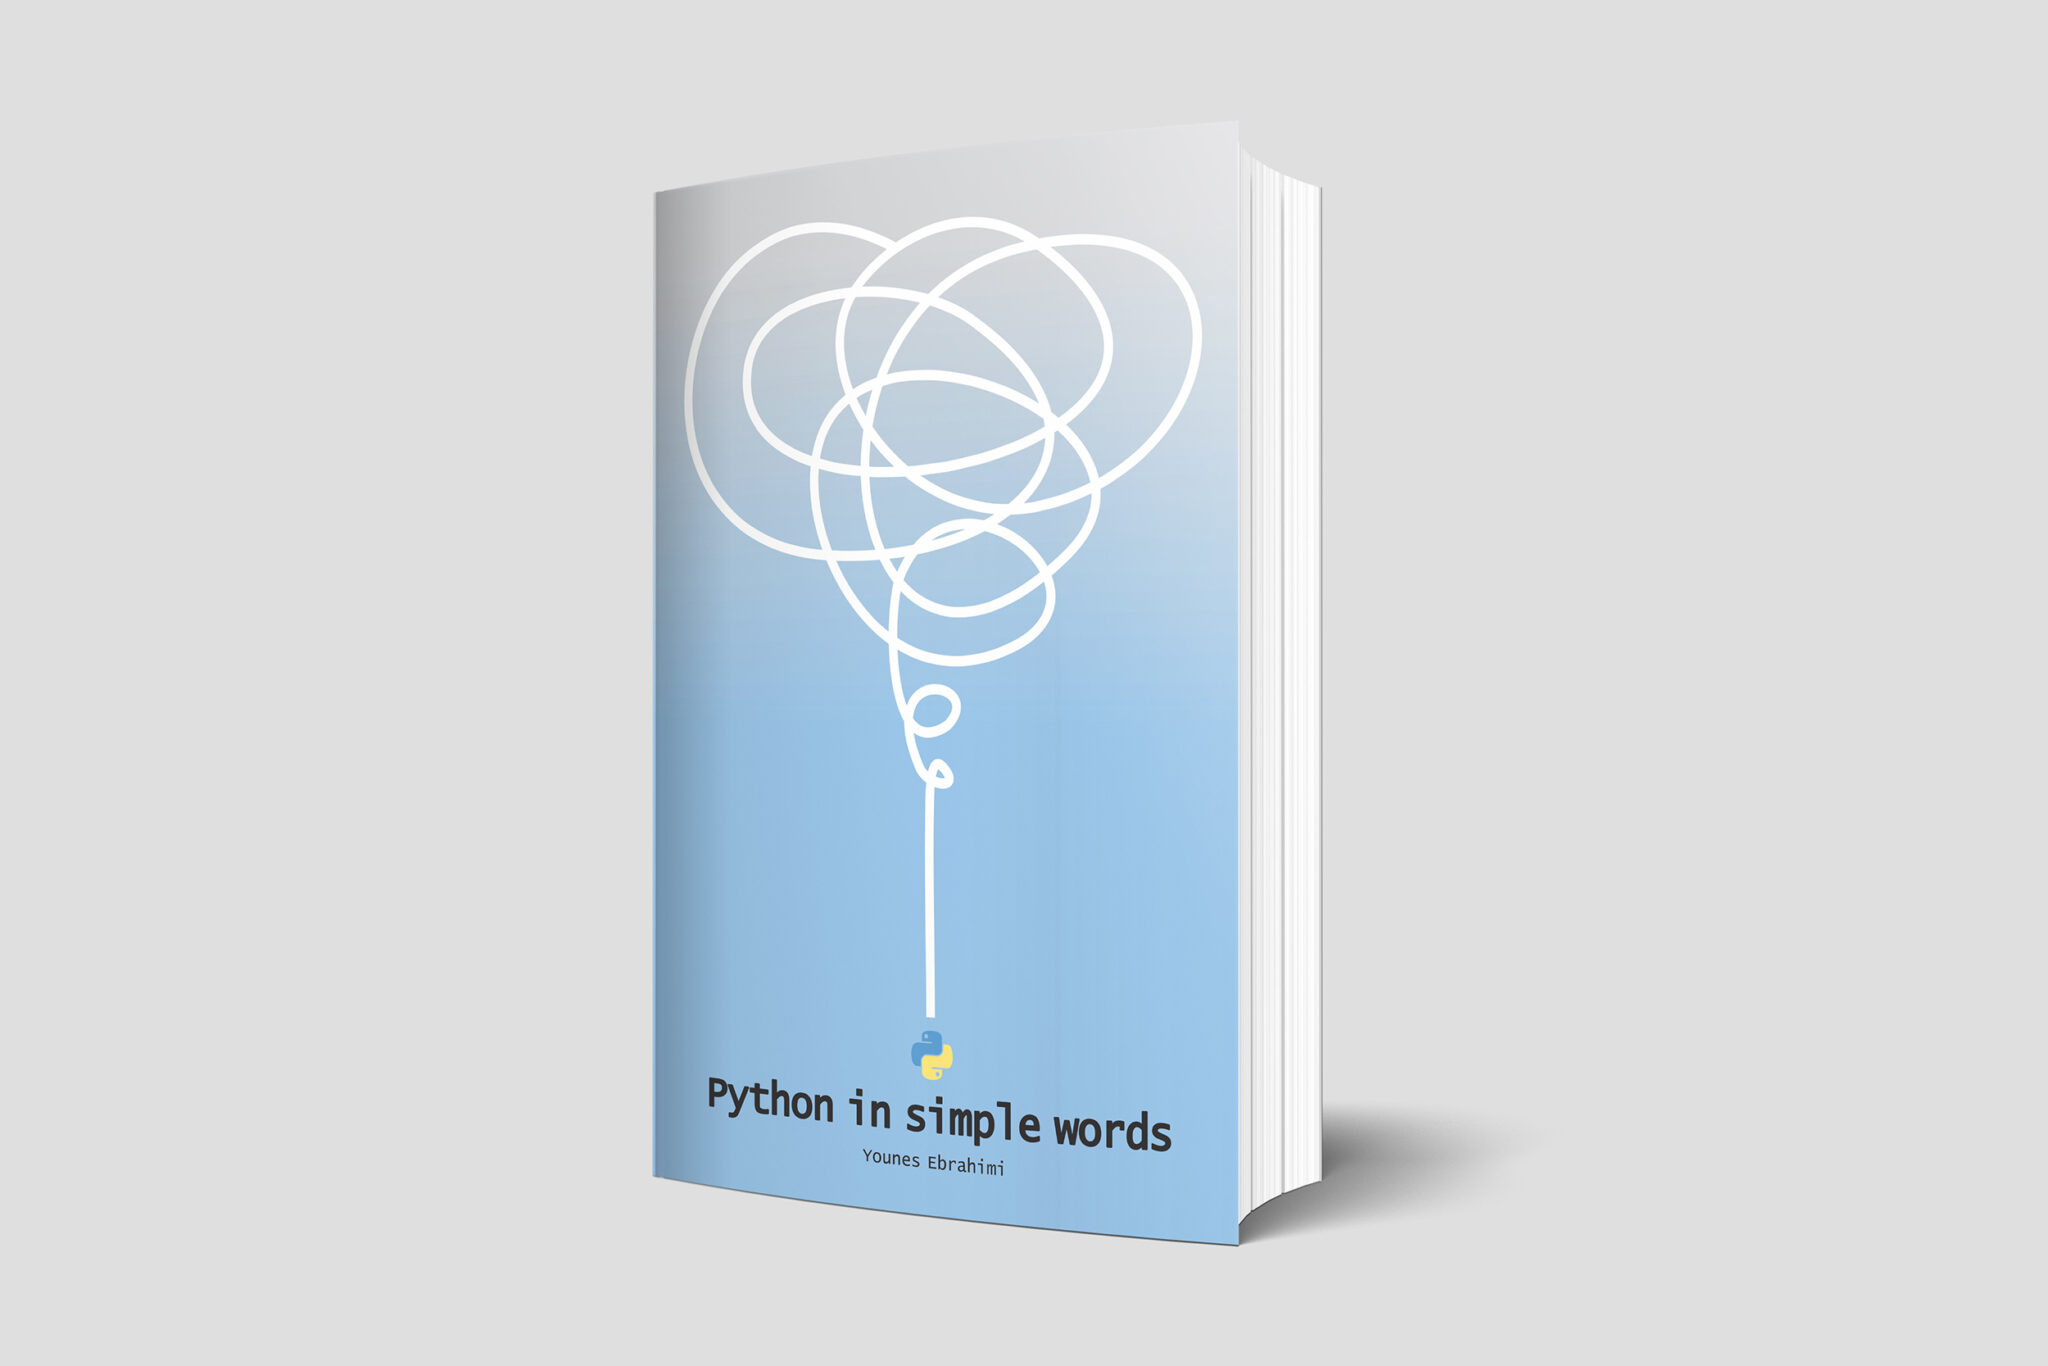 Python in simple words